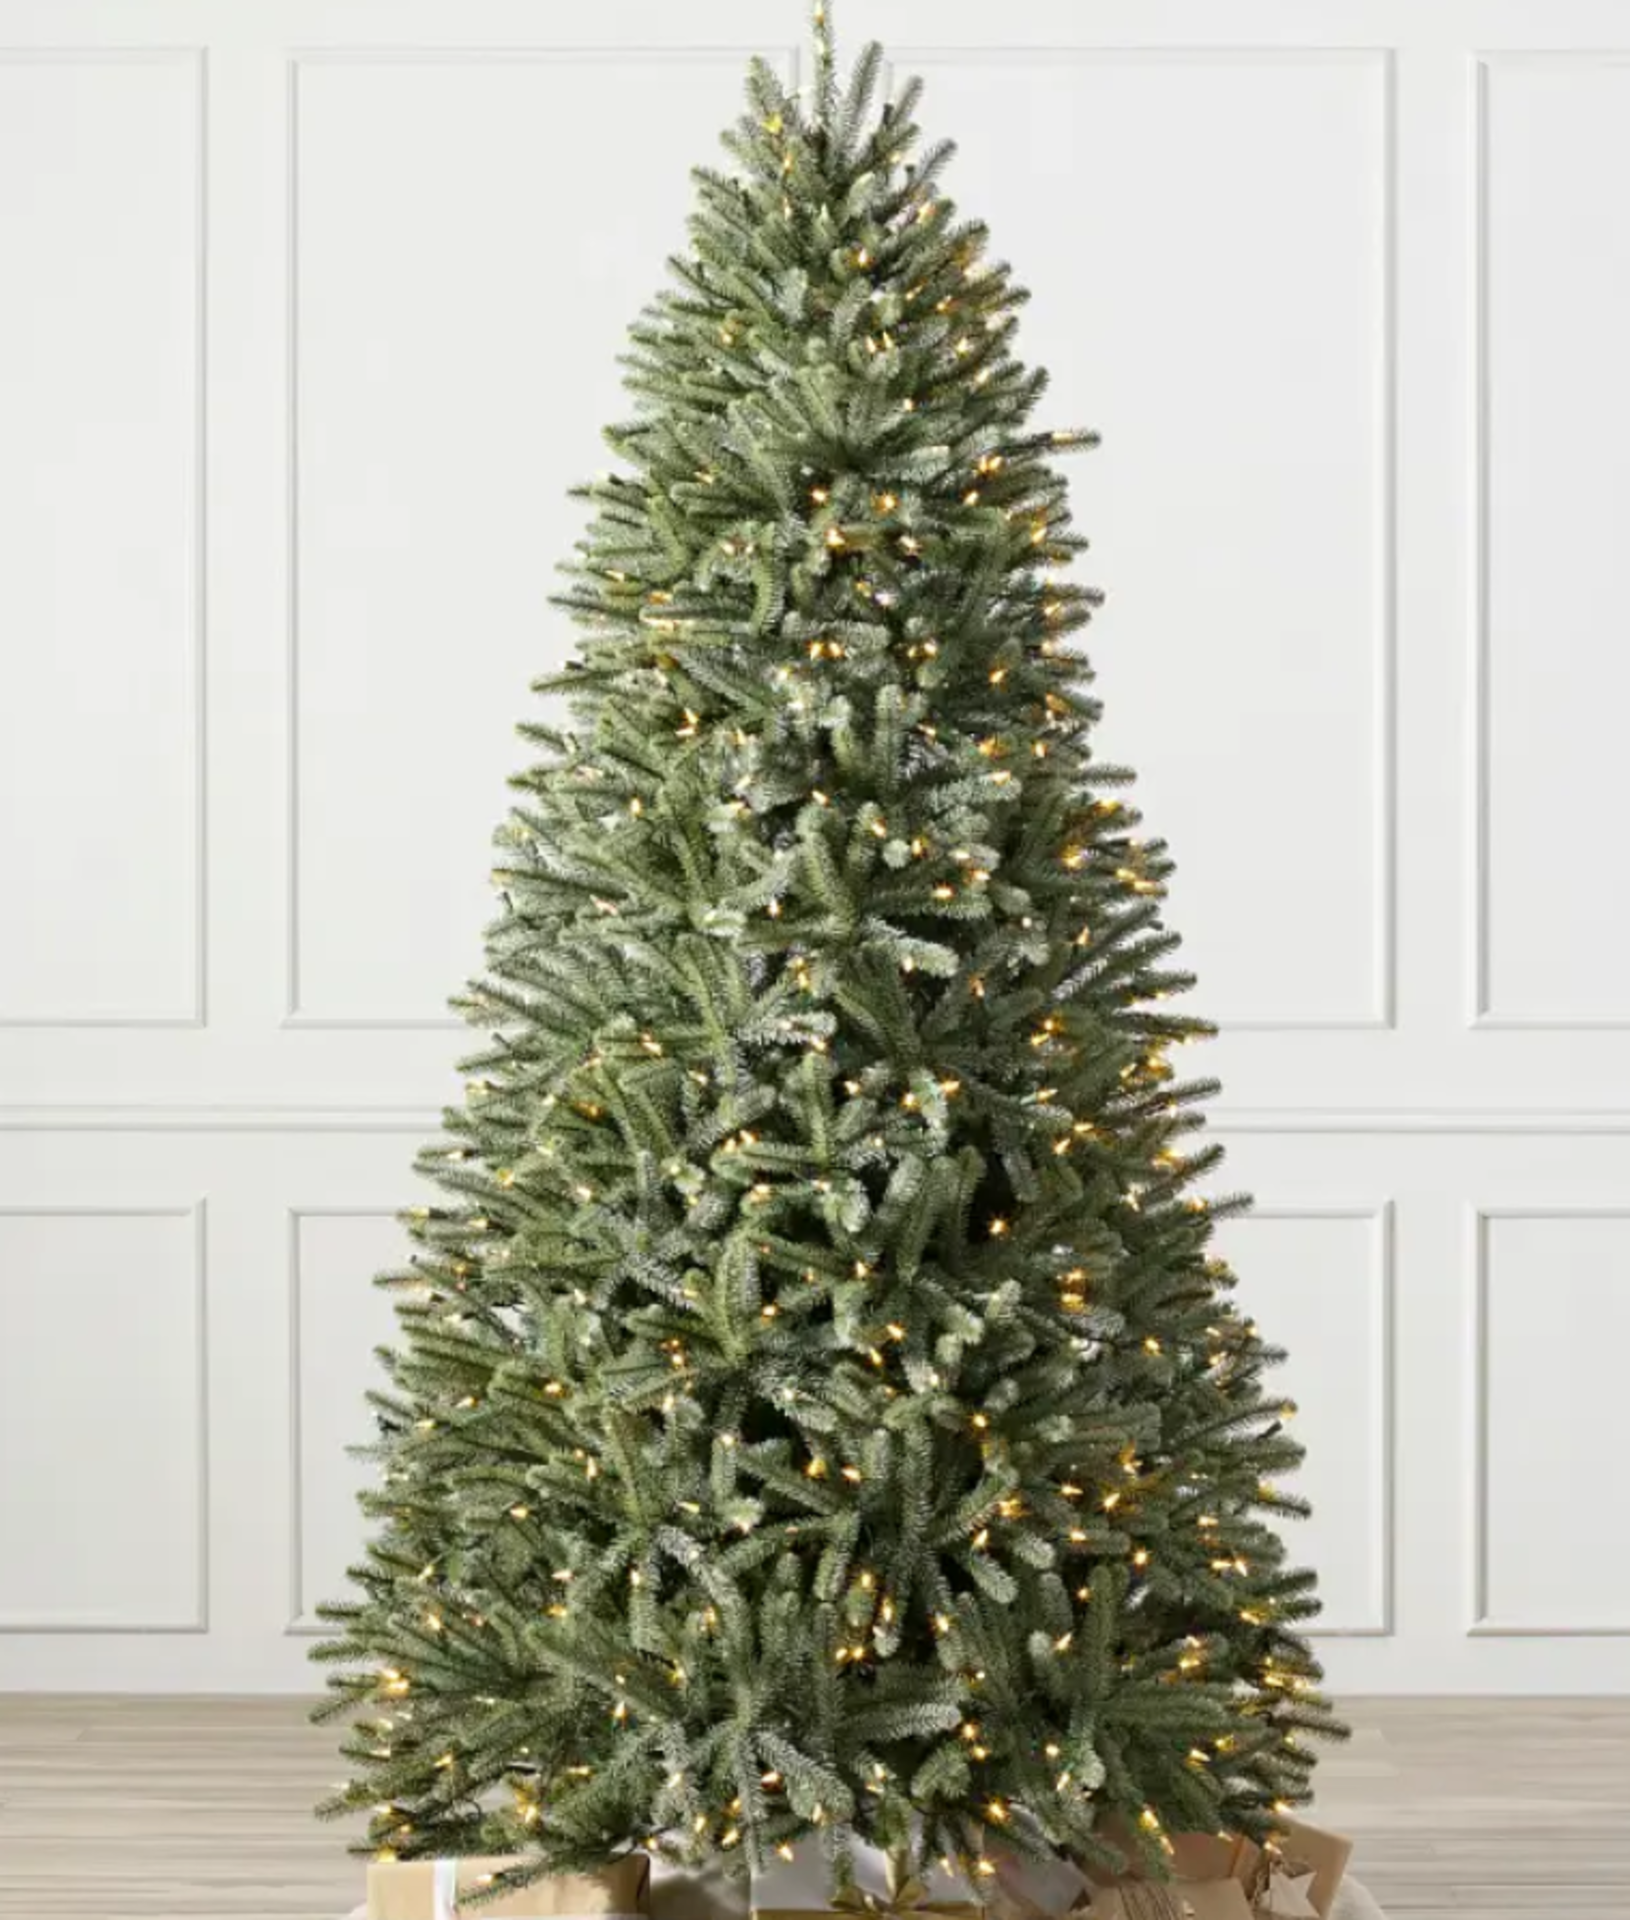 BH (The worlds leading Christmas Tree Brand) Royal Blue Spruce® 6' Tree with LED Clear Lights RRP £